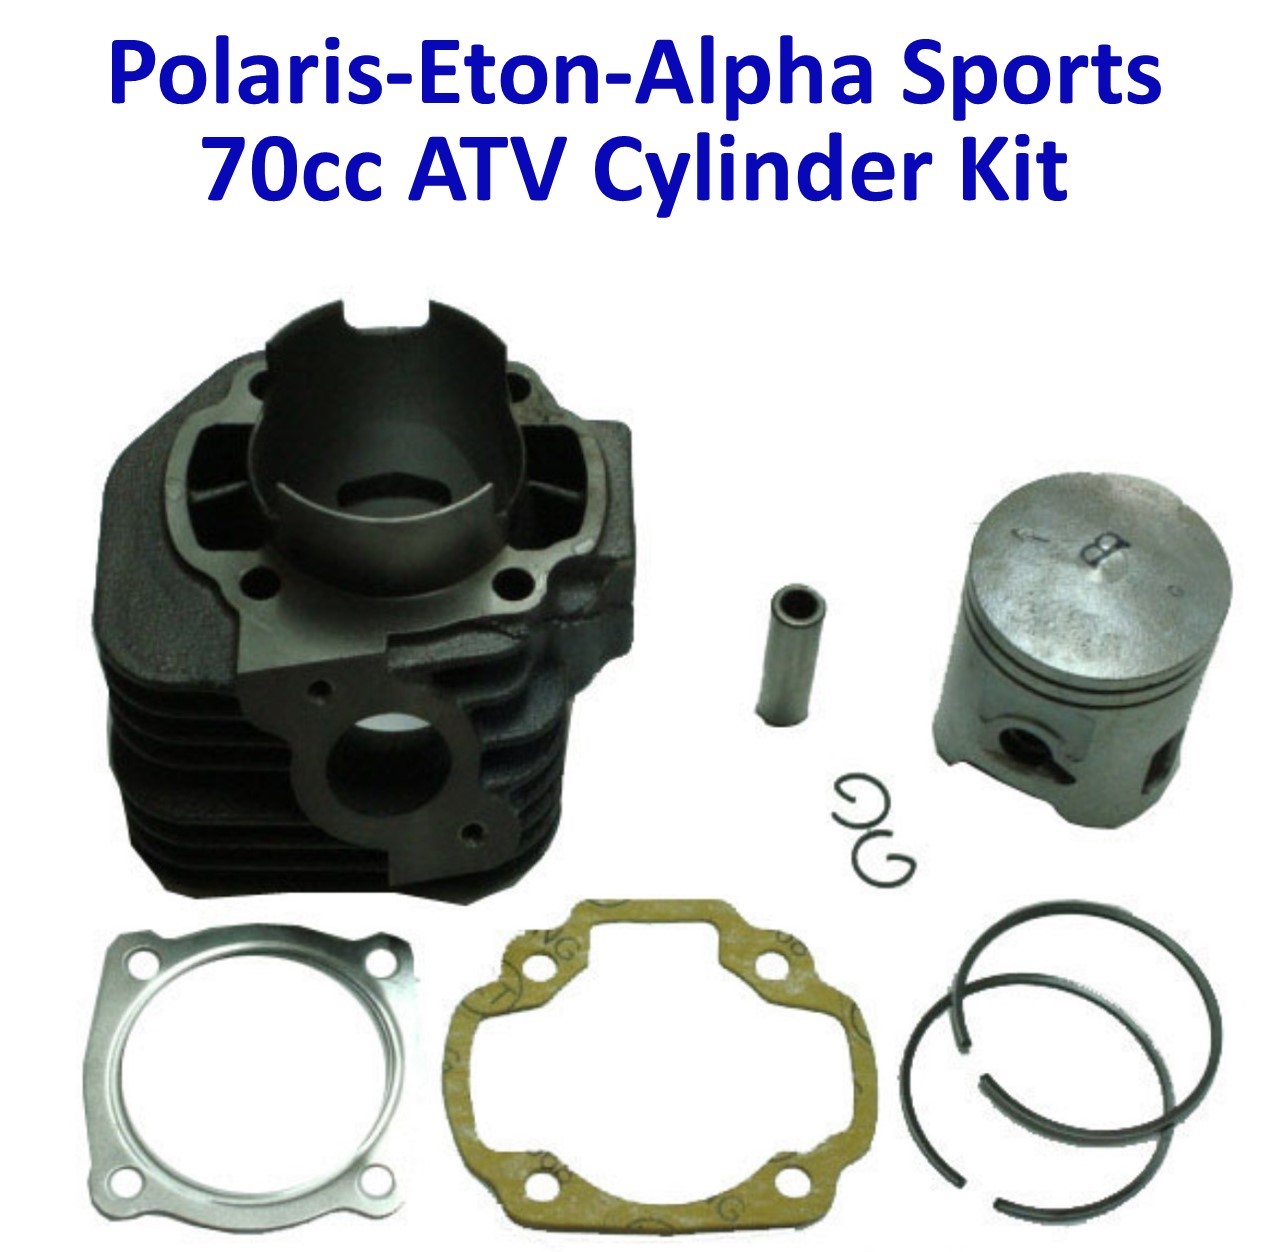 Cylinder Piston Top End Kit 70cc 2 Stroke 47mm Fits E-Ton Viper RXL70 ATVs + Viper 50 and Beamer, Matrix 50cc Scooters (See More Info) B=47mm 10mm H=64mm Adly, E-Ton, Jog, Polaris + More - Click Image to Close